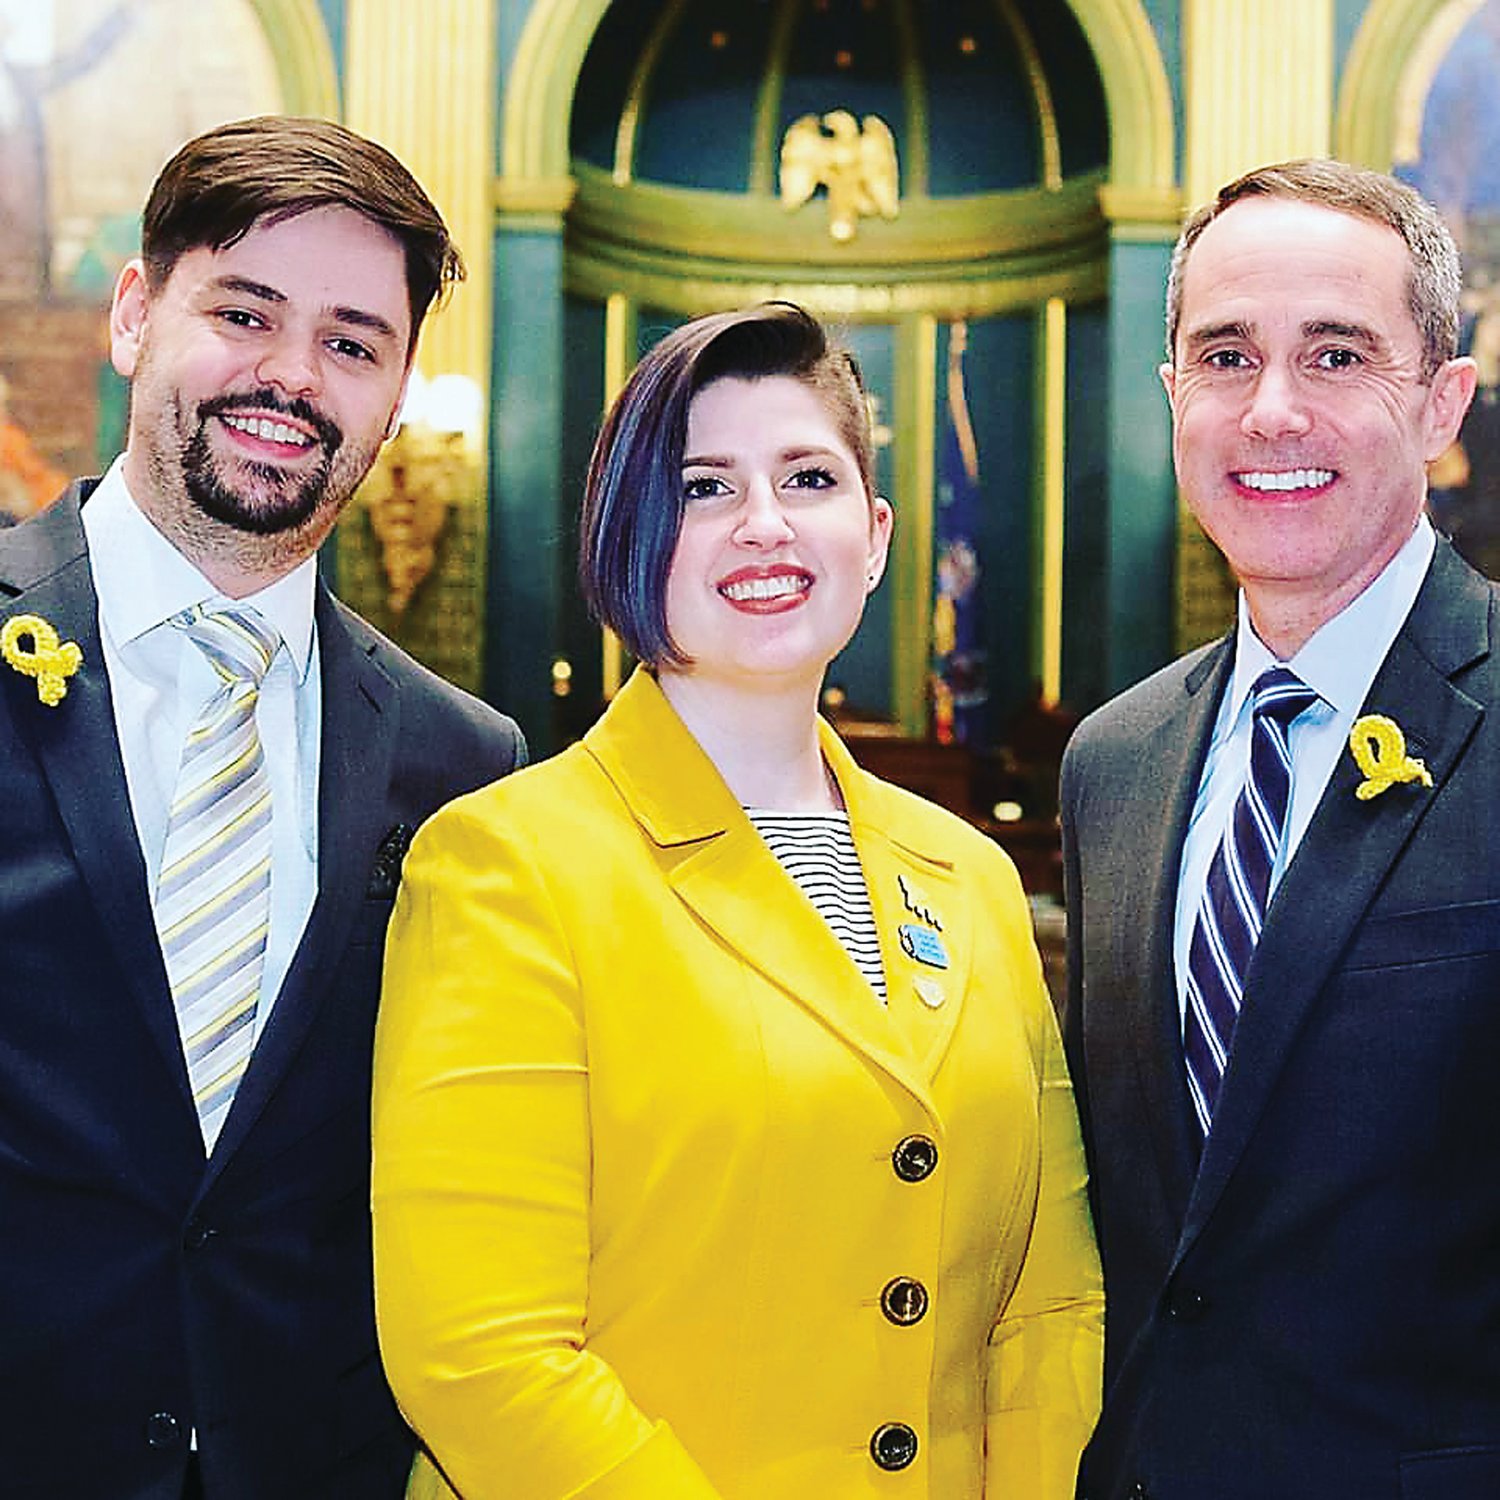 Ryan Leach, left, Rachel Leach and Sen. Steve Santarsiero were photographed in 2019, when Santarsiero introduced a resolution to declare March Endometriosis Awareness Month. The Leaches live in Chalfont.